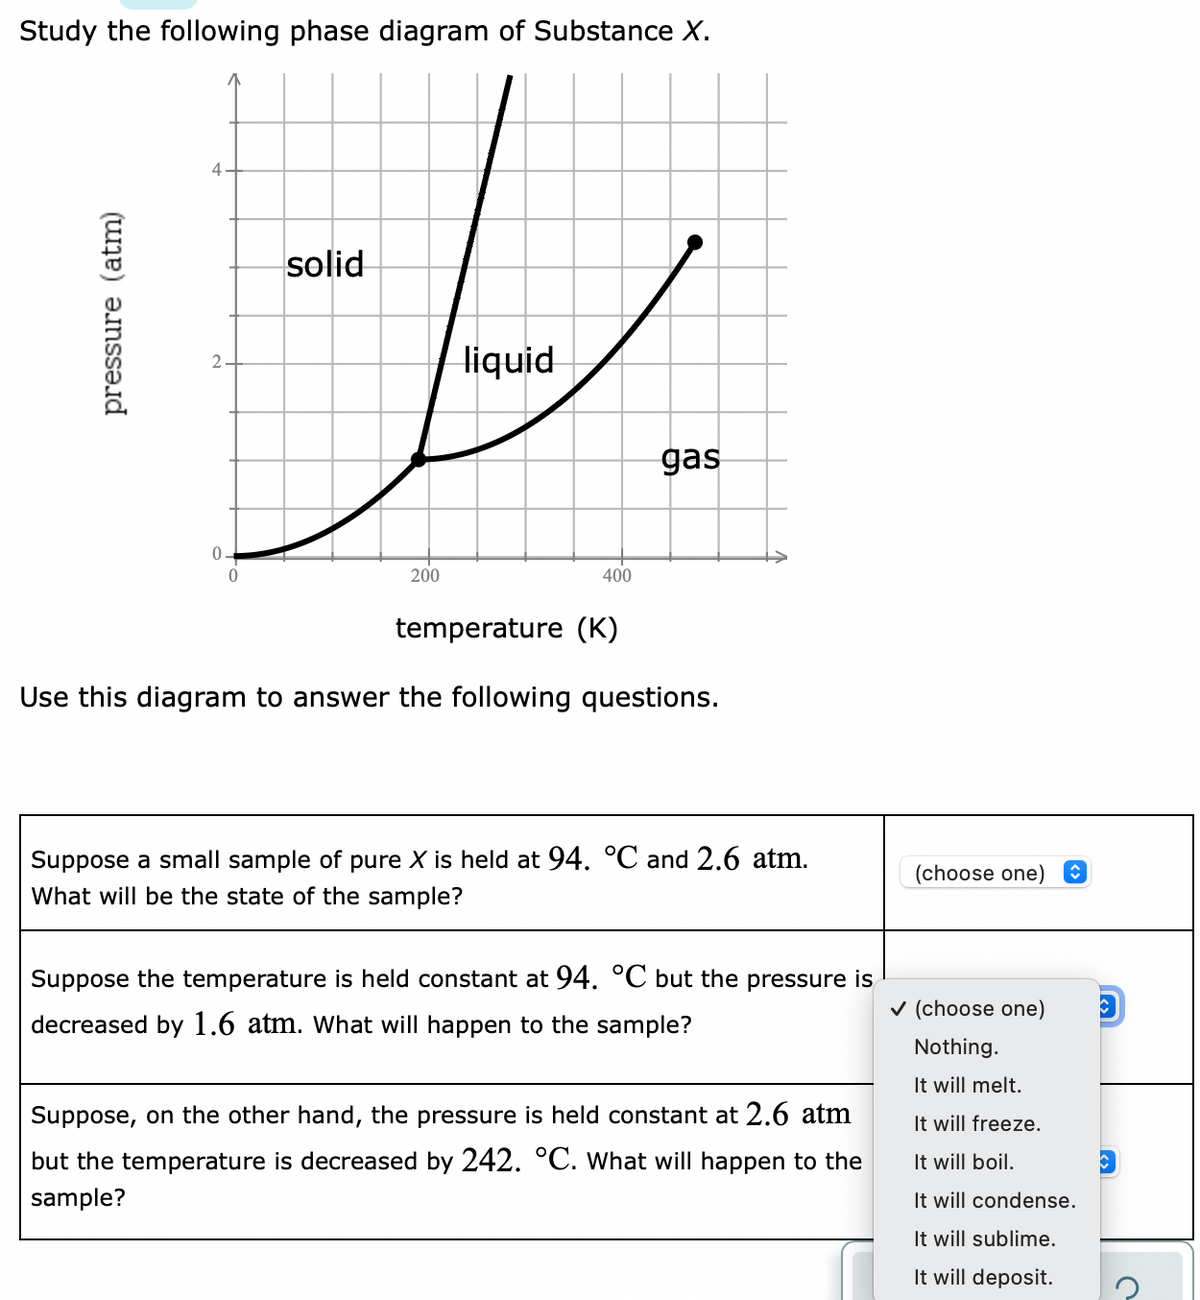 Study the following phase diagram of Substance X.
4
solid
liquid
gas
200
400
temperature (K)
Use this diagram to answer the following questions.
Suppose a small sample of pure X is held at 94. °C and 2.6 atm.
What will be the state of the sample?
(choose one)
Suppose the temperature is held constant at 94. °C but the pressure is
v (choose one)
decreased by 1.6 atm. What will happen to the sample?
Nothing.
It will melt.
Suppose, on the other hand, the pressure is held constant at 2.6 atm
It will freeze.
but the temperature is decreased by 242. °C. what will happen to the
It will boil.
sample?
It will condense.
It will sublime.
It will deposit.
pressure (atm)
